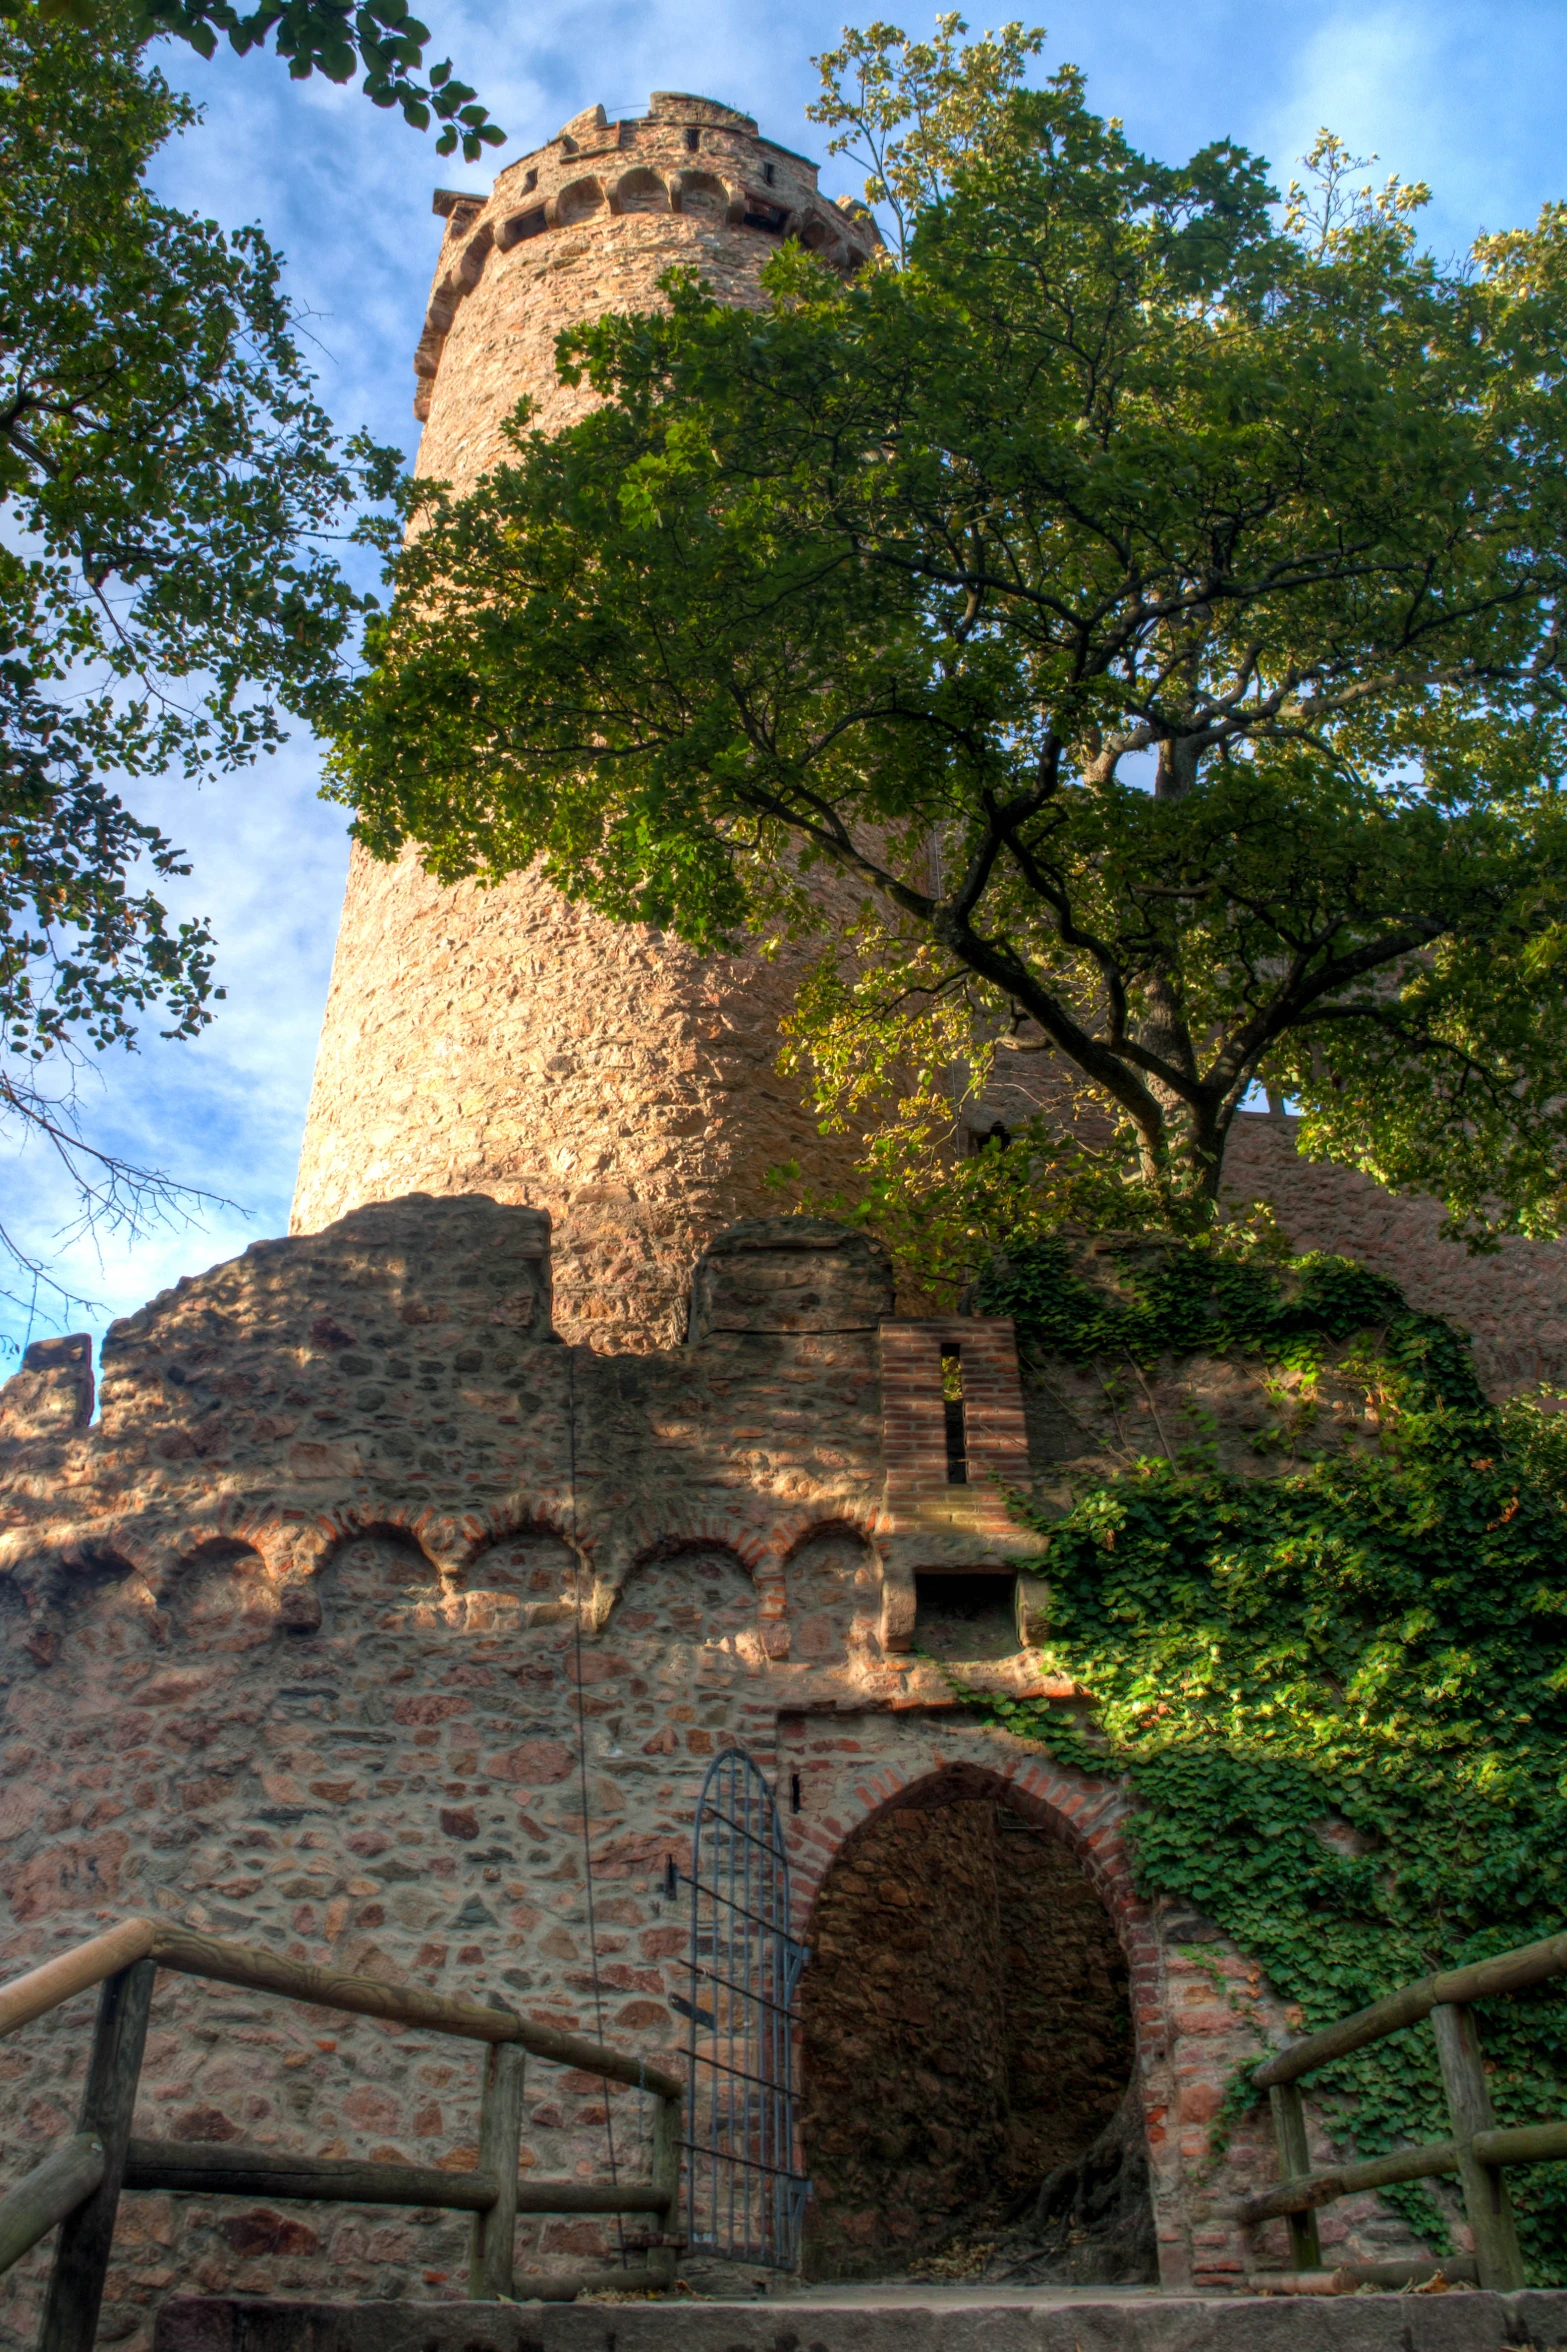 a very large old brick tower near some trees